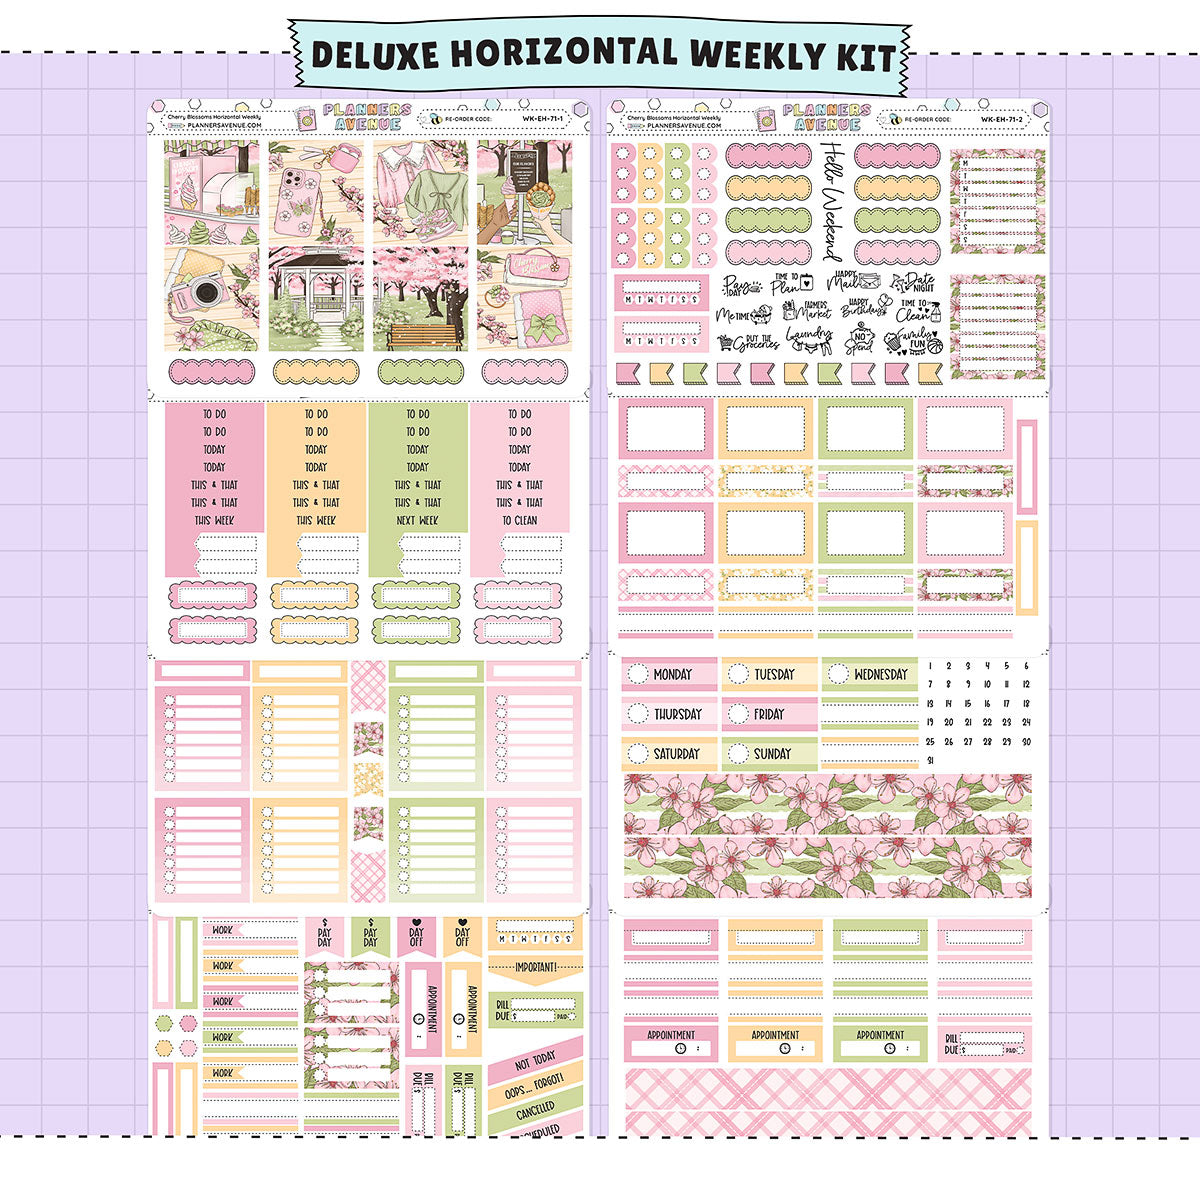 Cherry Blossoms Horizontal Weekly Sticker Foiled Kit (GOLD FOIL)